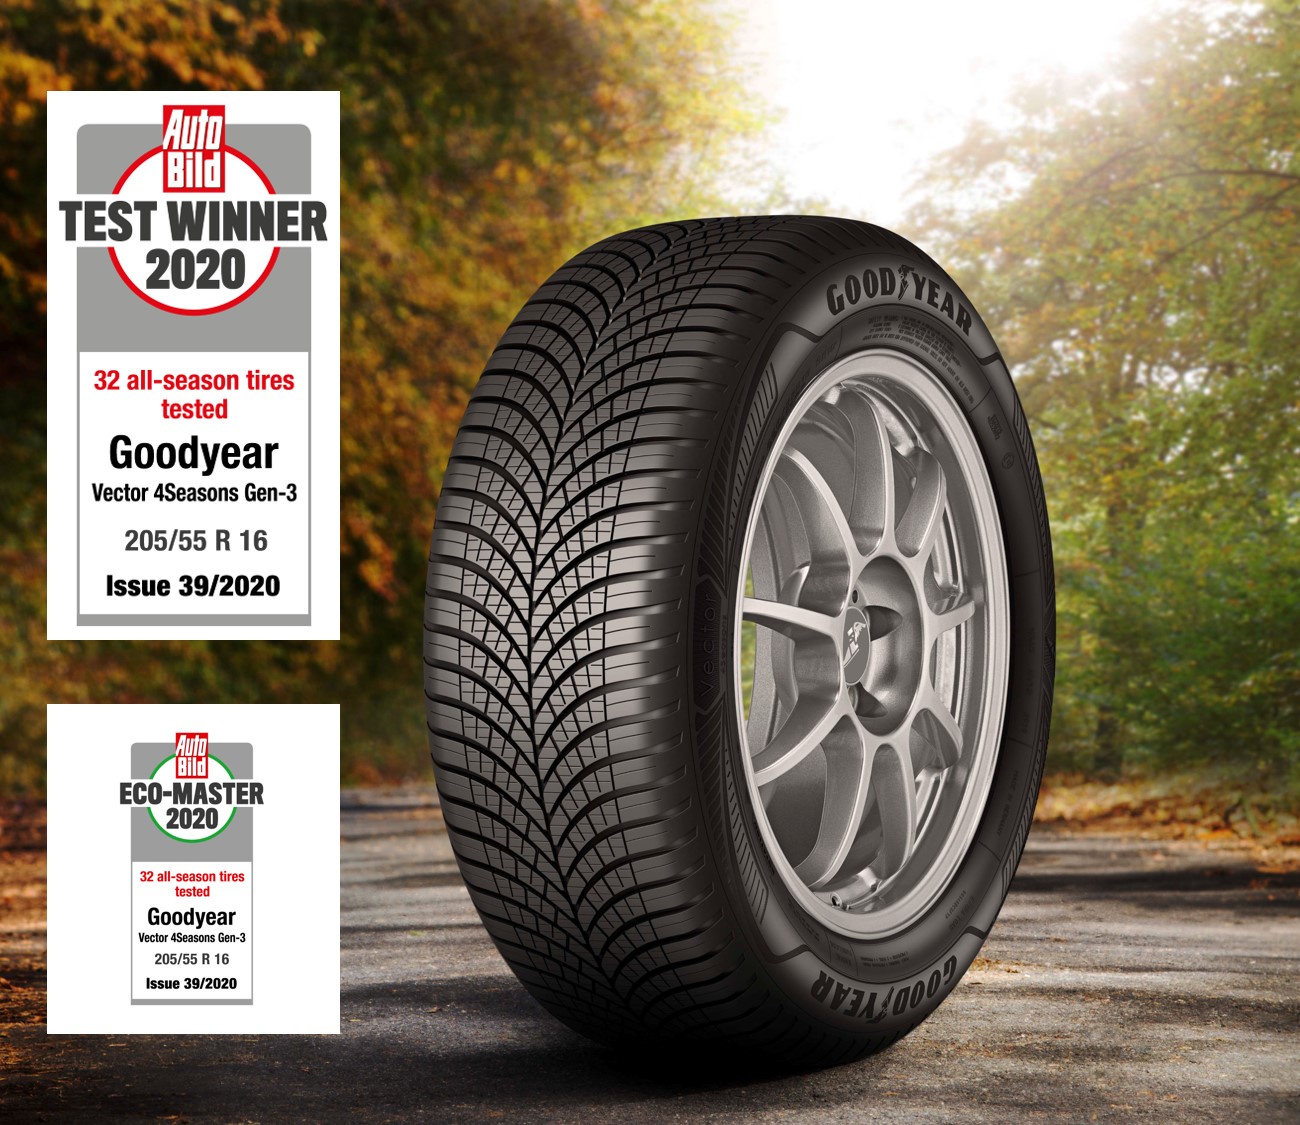 Goodyear ‘thrilled’ with Vector 4Seasons Gen-3 all-season tyre test